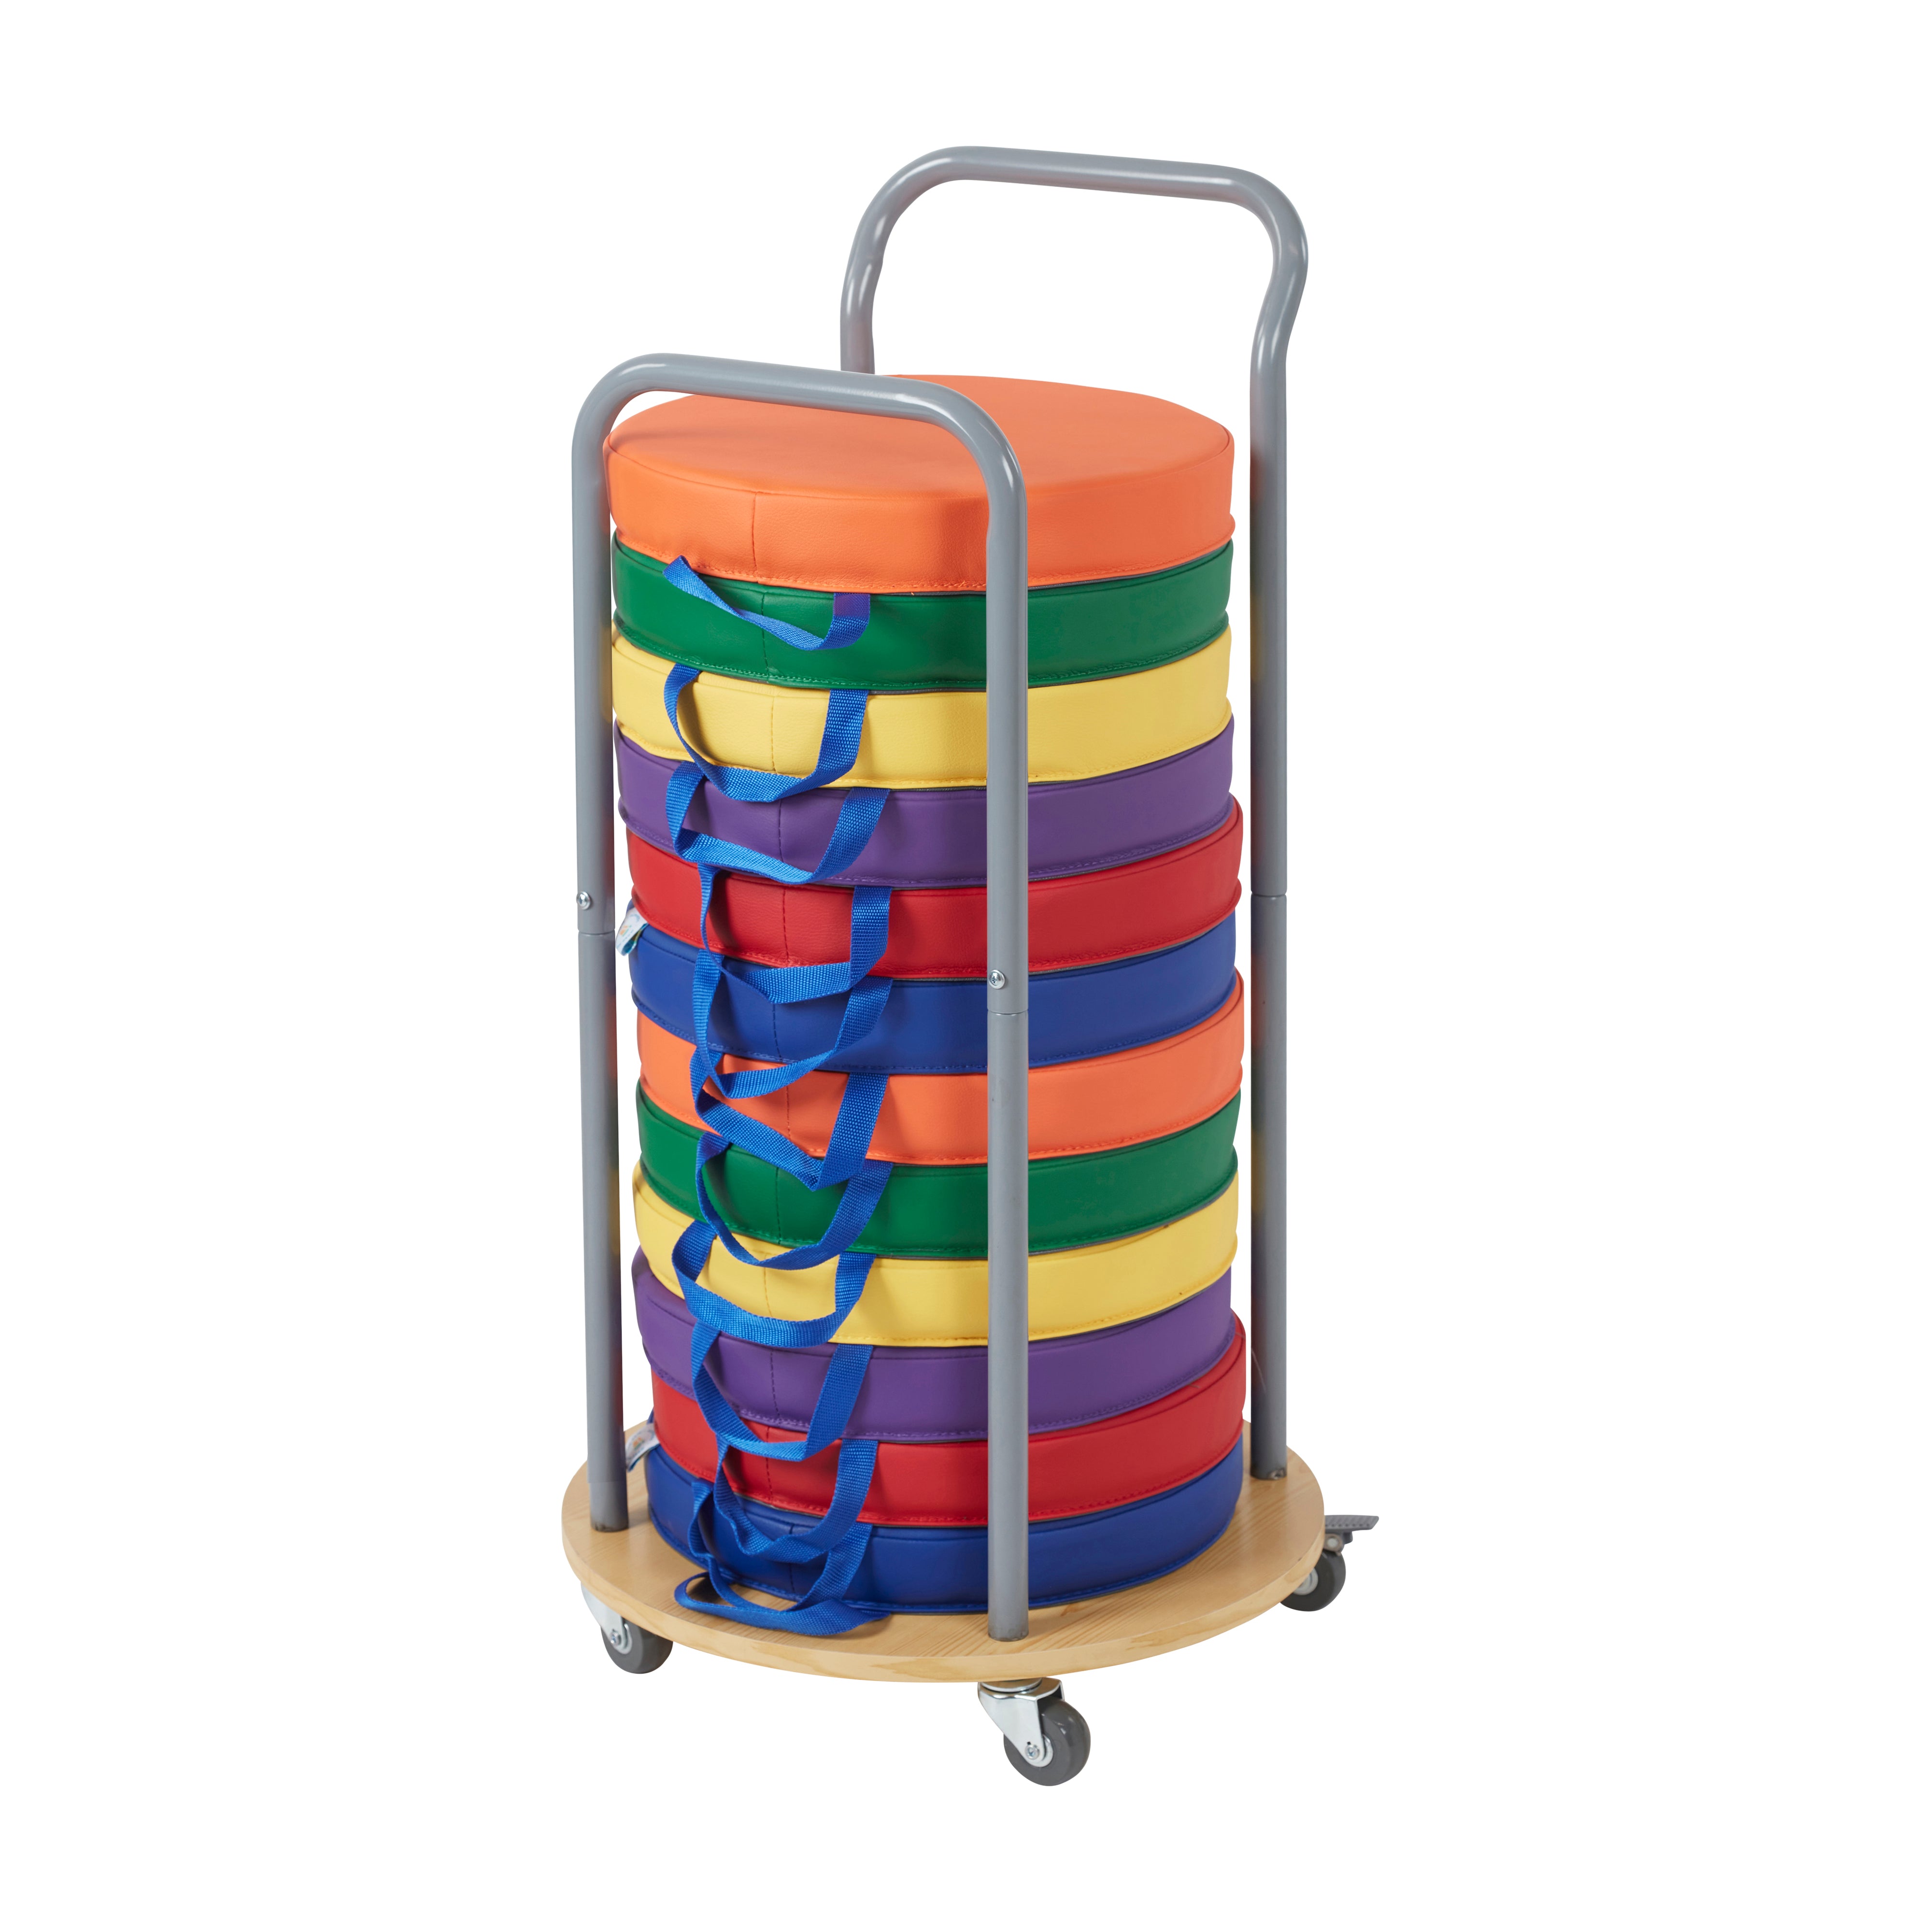 Mobile Storage Cart and 12 Round Floor Cushions with Handle, Classroom Flexible Seating